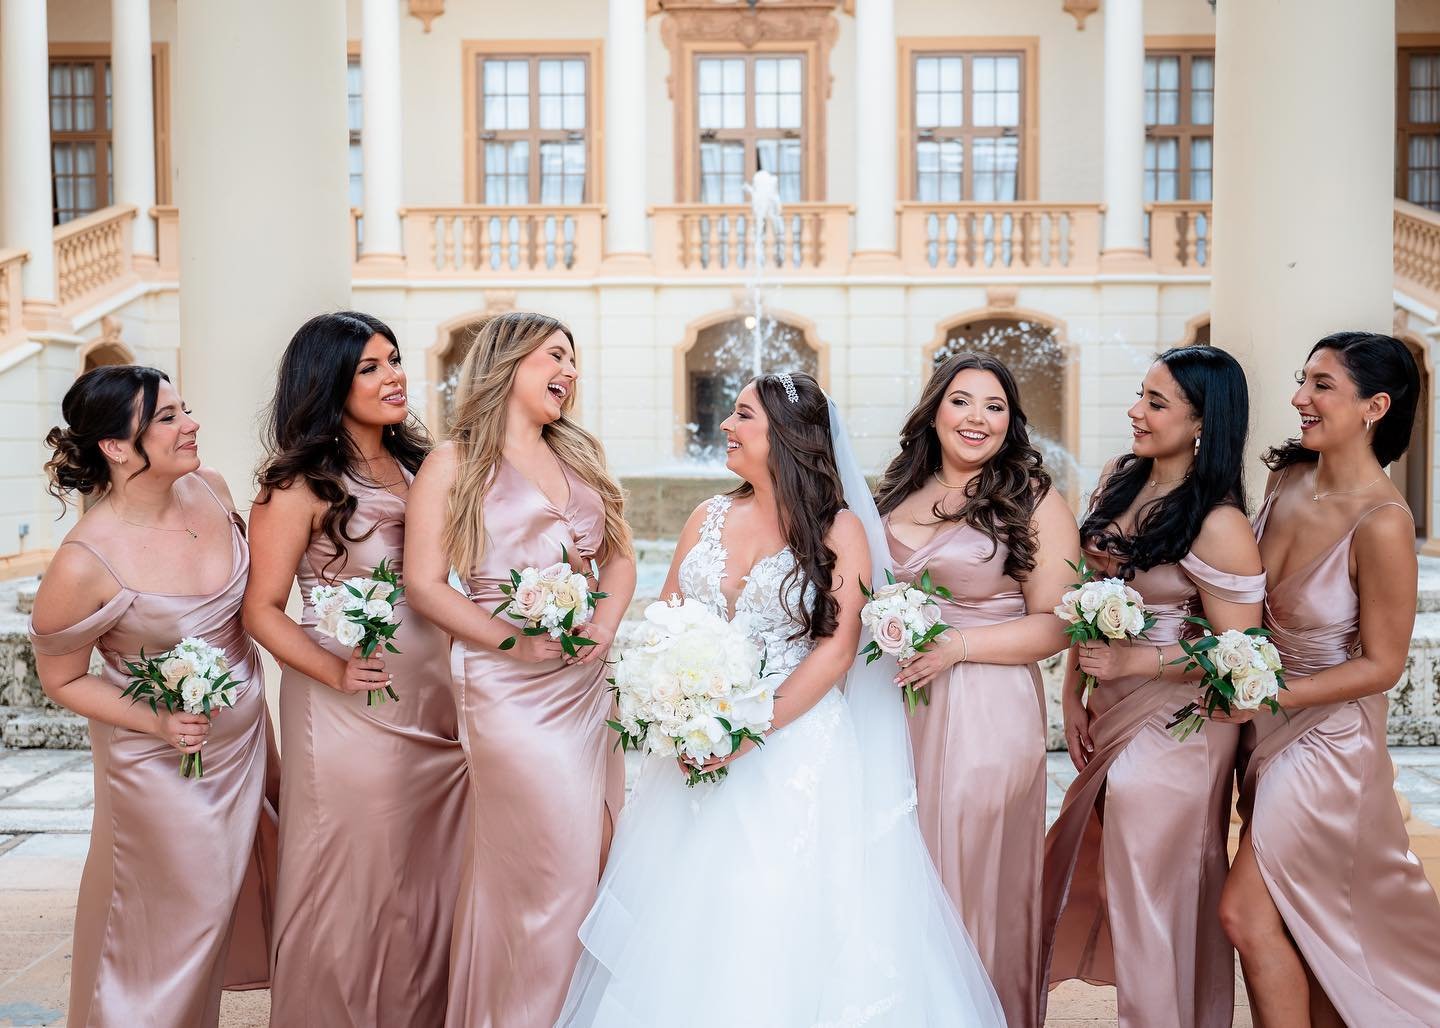 Surrounded by love and laughter, the bride and her tribe shine bright on this unforgettable journey. #bridetribe #bridesmaidgoals #bridesmaidsdresses ⠀
__________ ⠀
Credits: ⠀
Wedding Planner: @gc.eventsmiami ⠀
Getting Ready Venue: @thebiltmoremiami 